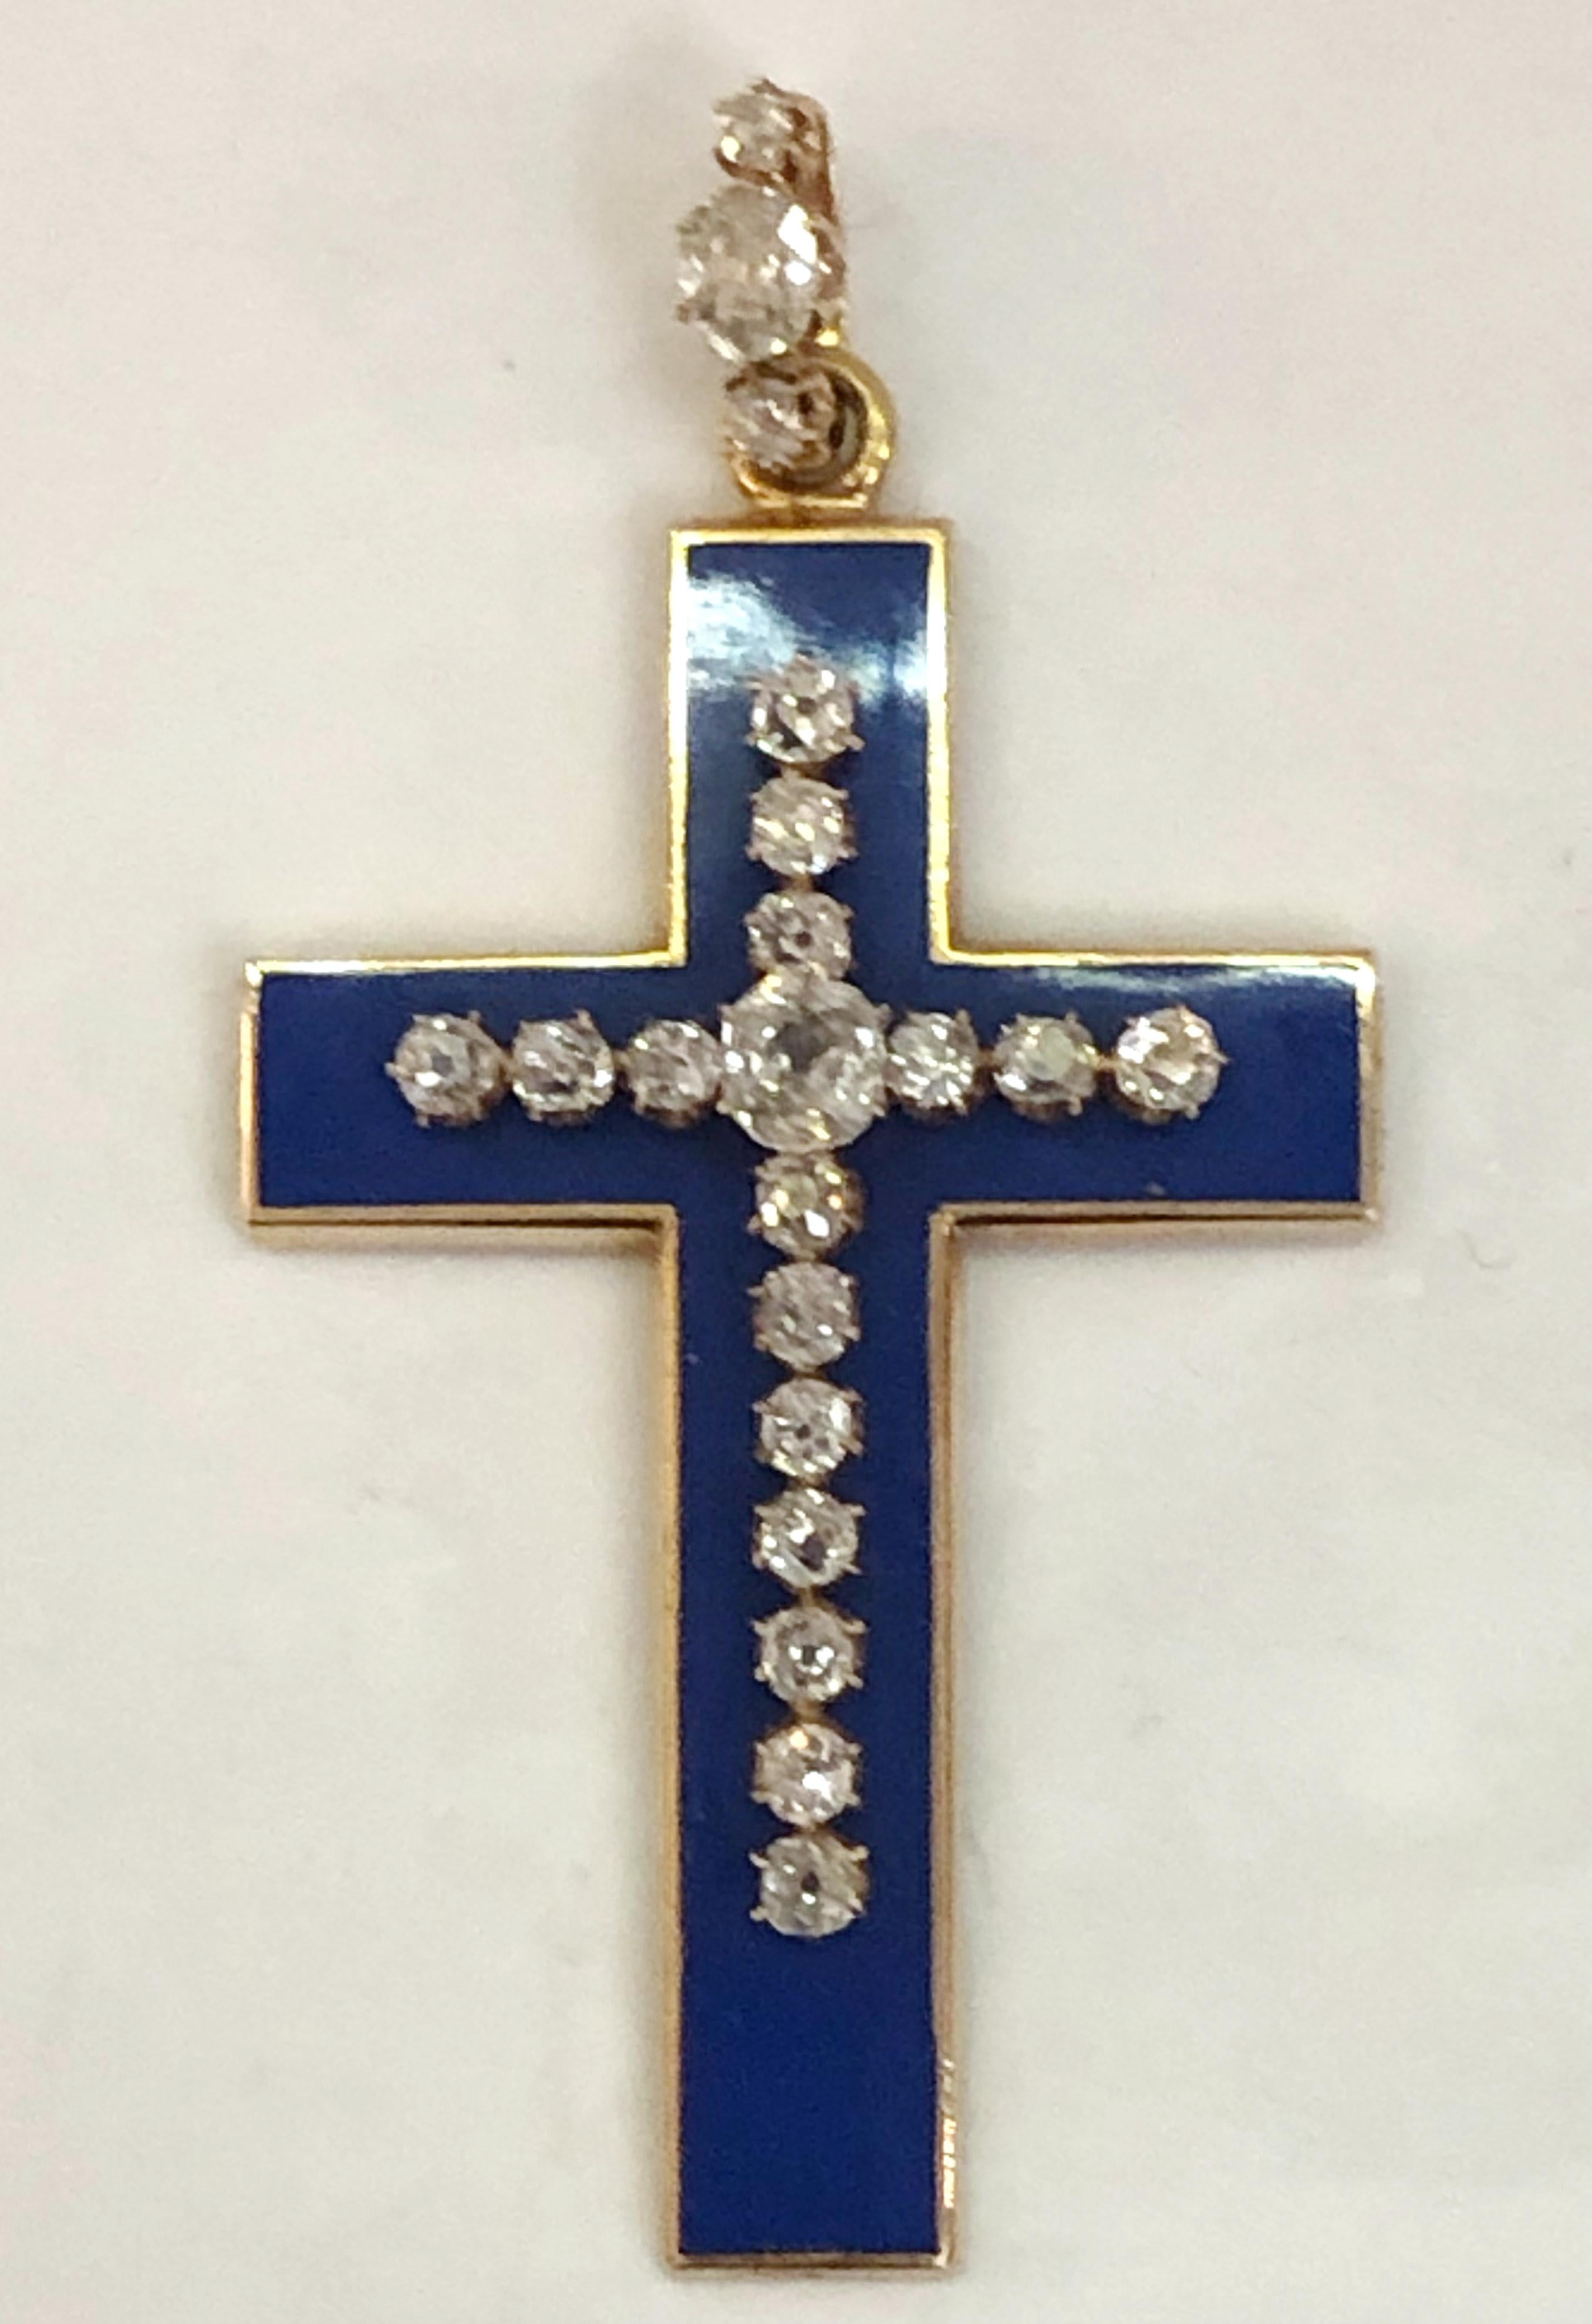 Vintage cross necklace pendant of 18 karat rose gold with blue enamel and diamonds for a total of 3 karats, Italy 1860-1880s